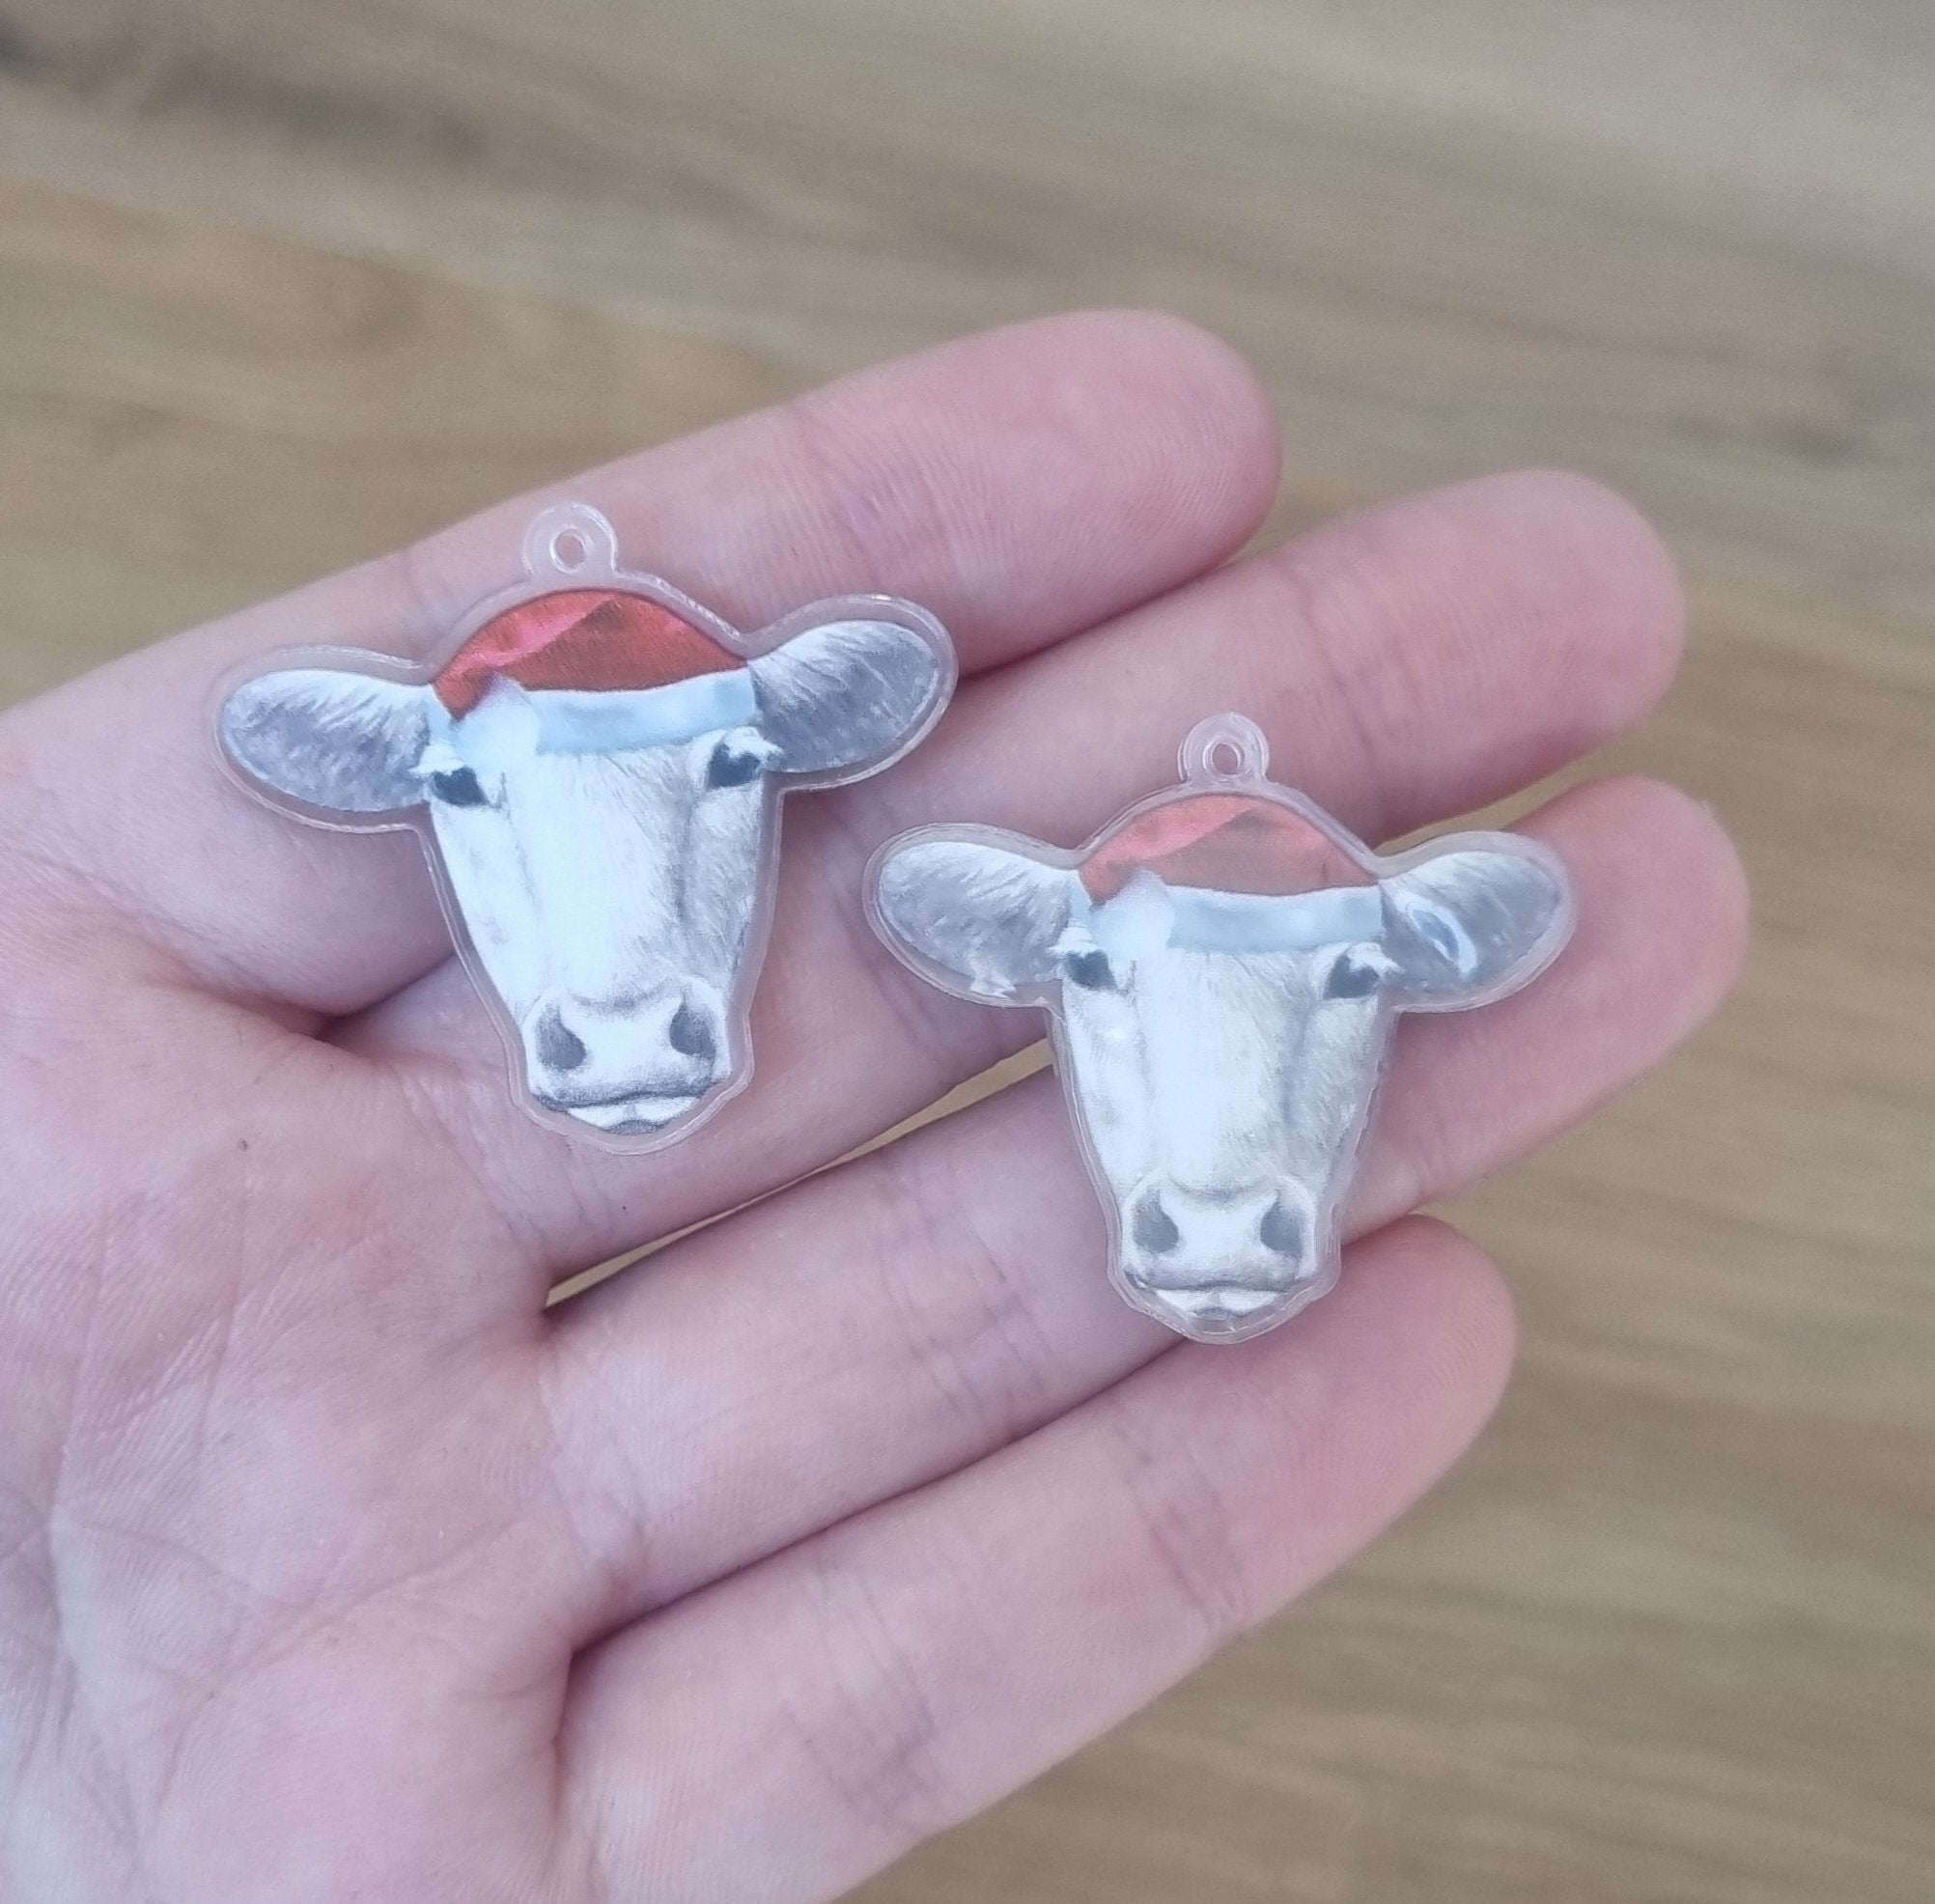 4pcs (2prs) 38mm acrylic cow for earrings, cow xmas earring, Laser cut acrylic, (No Stud) Acrylic Earrings, DIY earring, cow cabochon